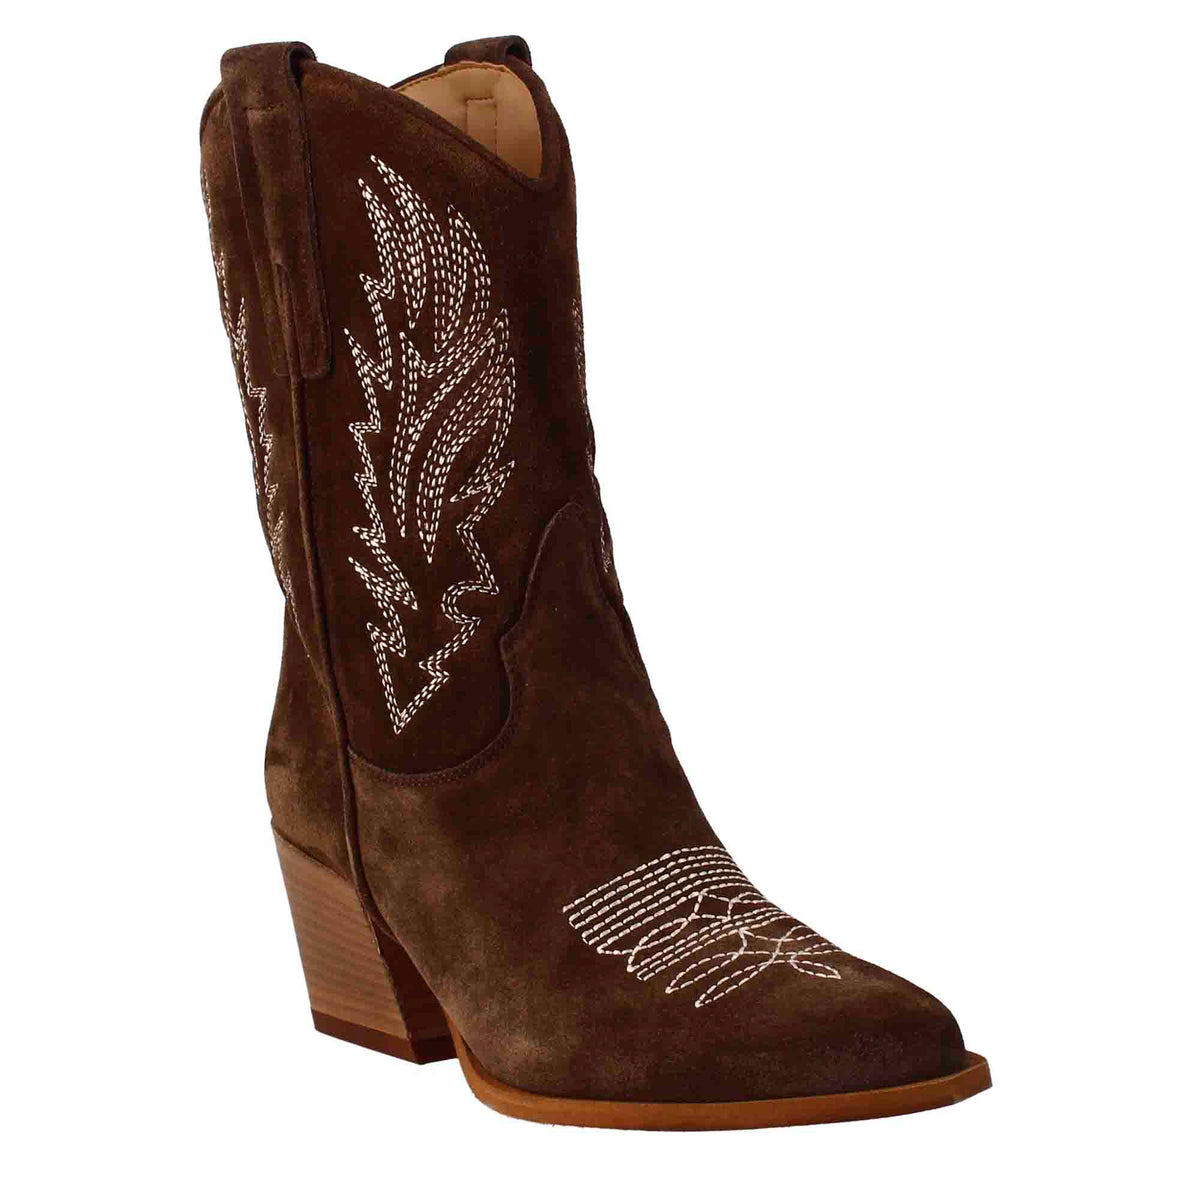 Women's low Texan boots in dark brown suede with embroidery.